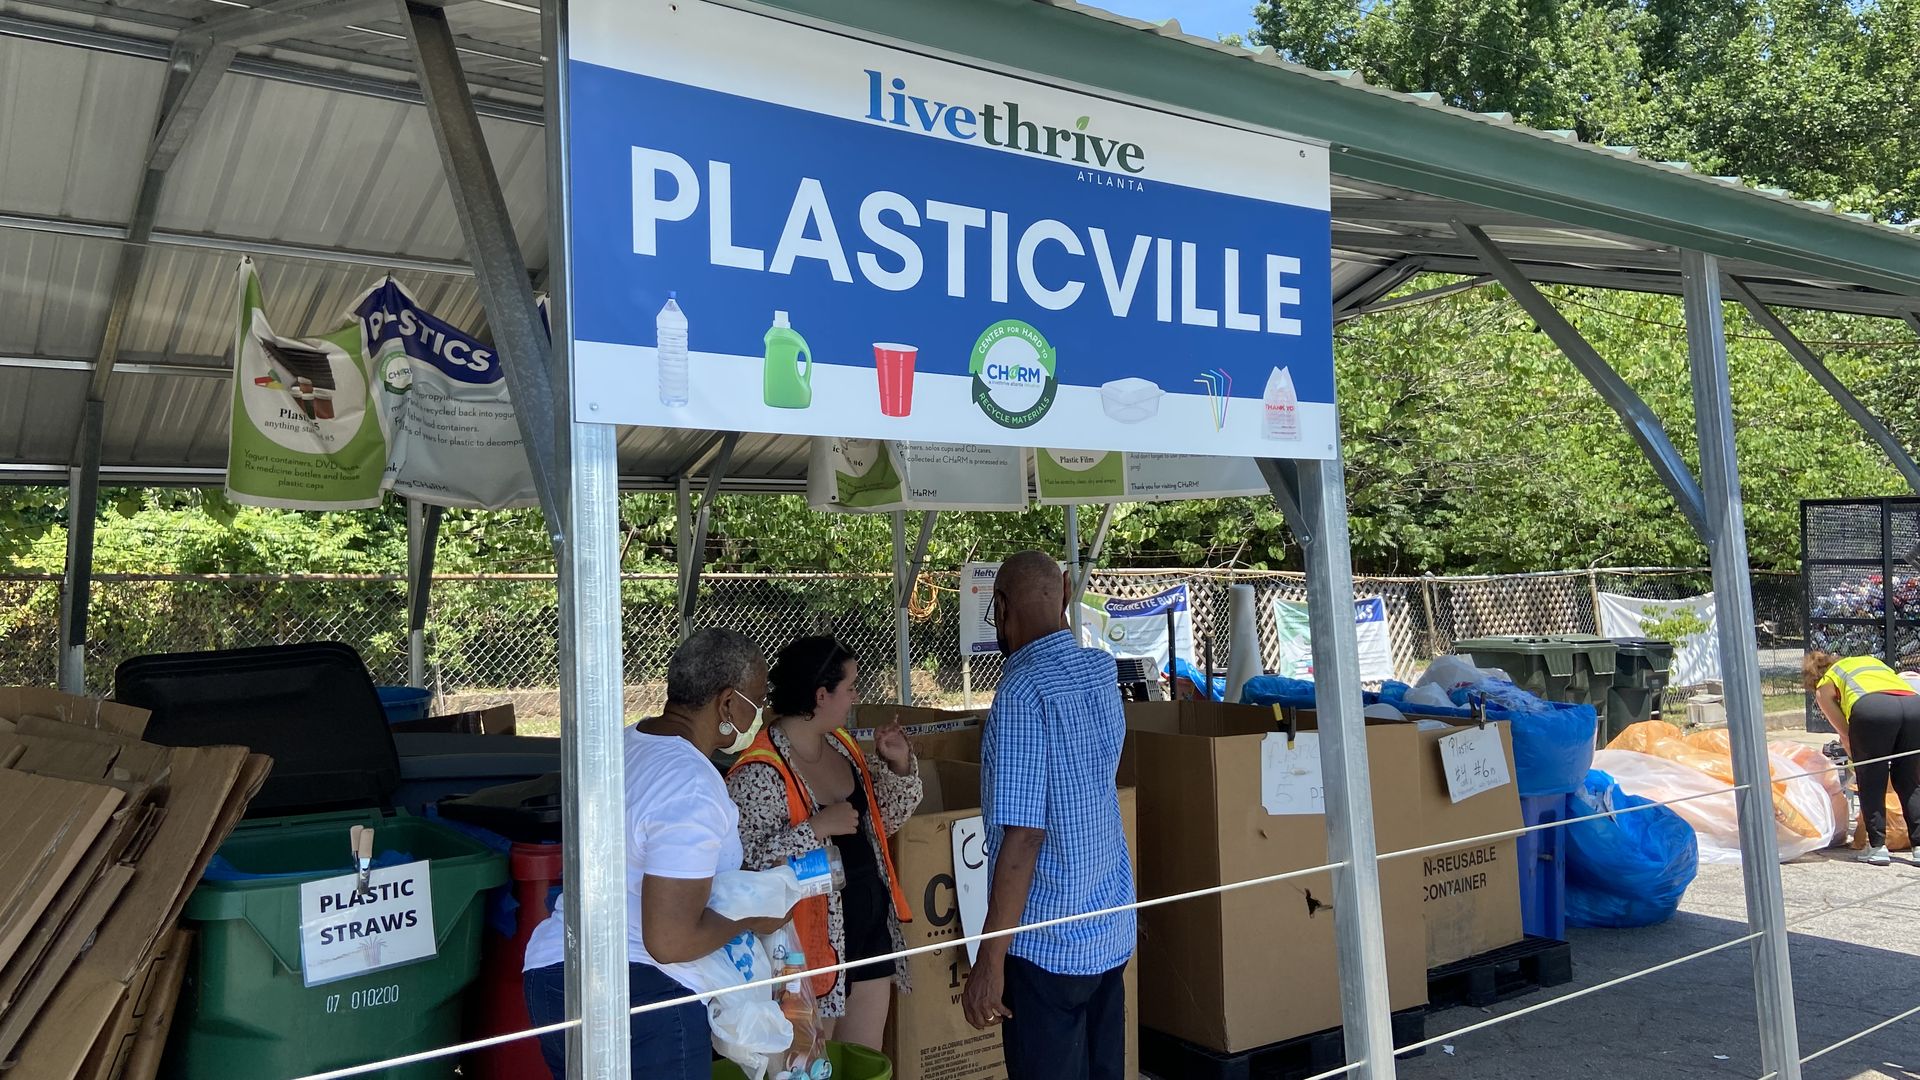 People throw out plastic under a sign that says “Plasticville” at the Center for Hard to Recycle Materials